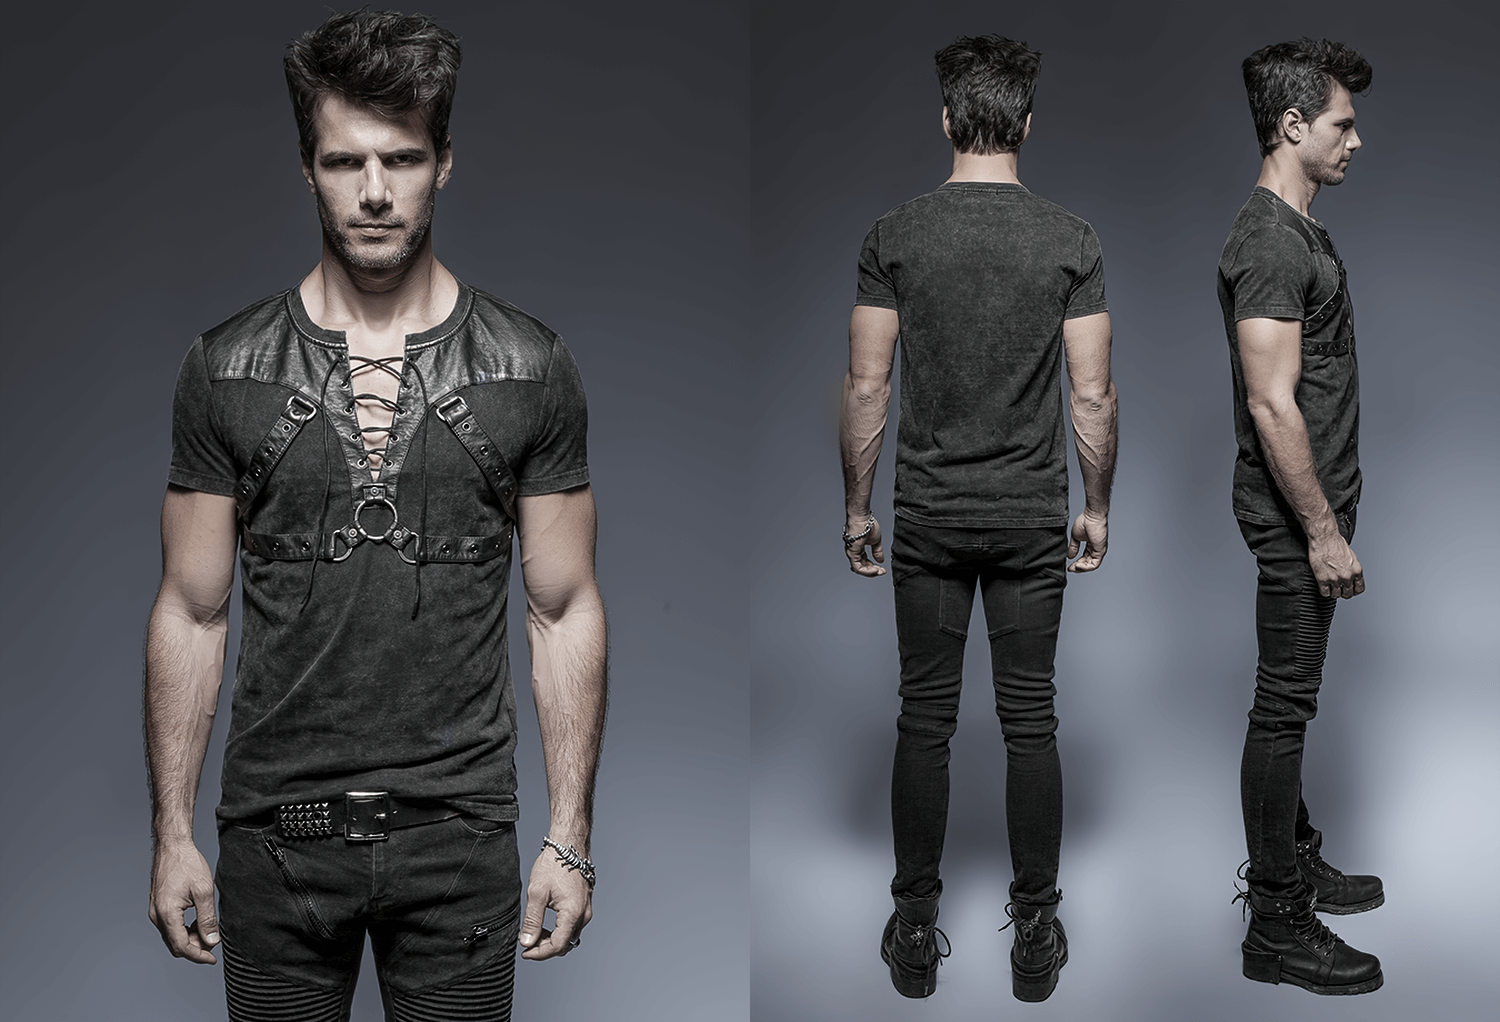 Edgy Punk Rock T-Shirt with Leather and Rope Details